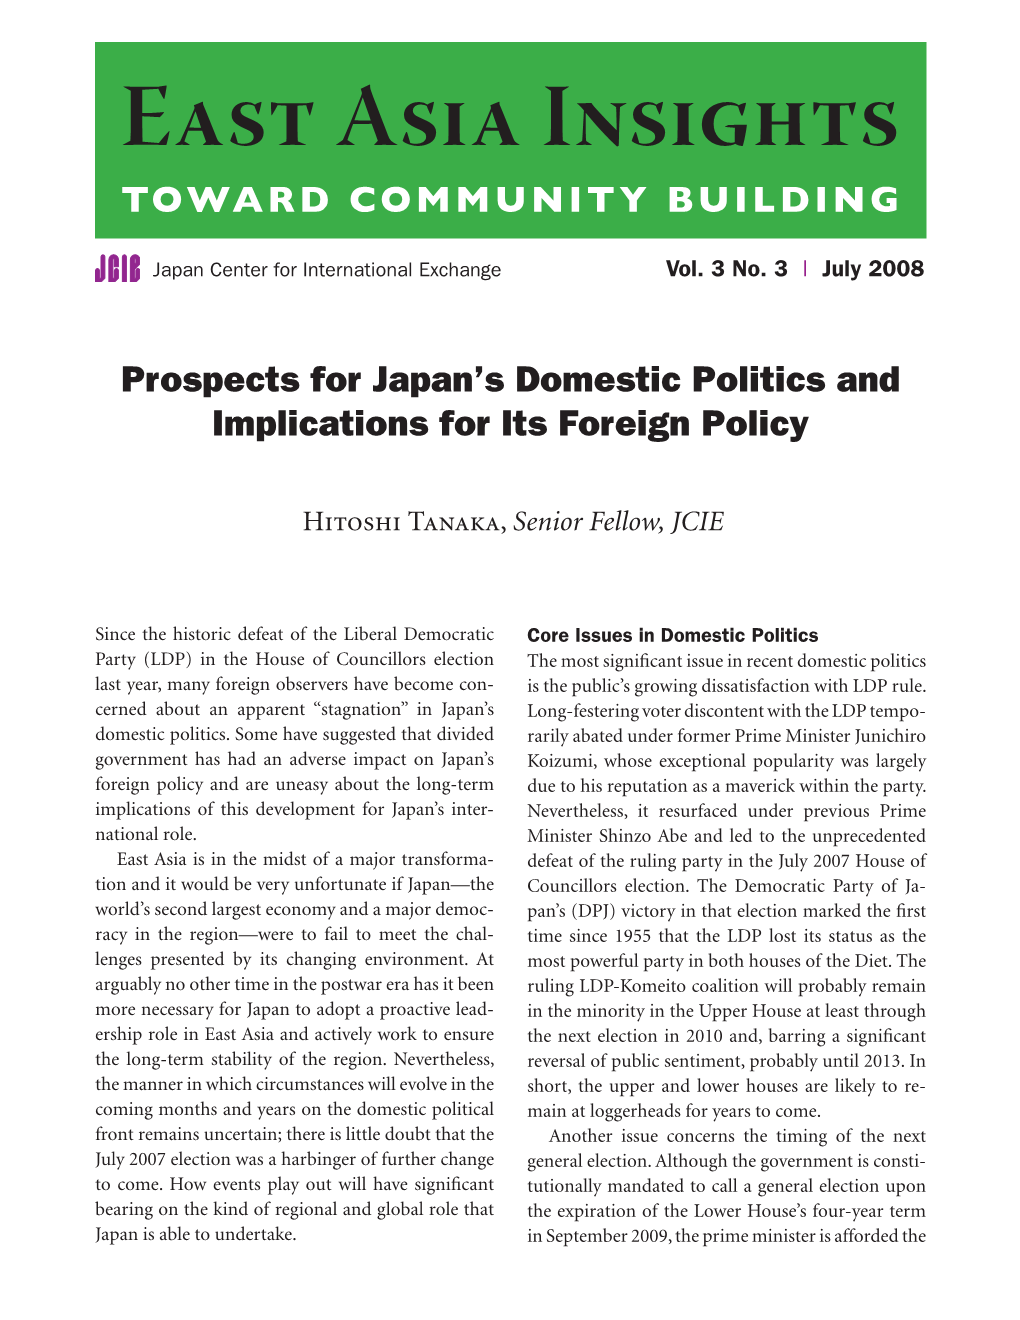 Prospects for Japan's Domestic Politics and Implications for Its